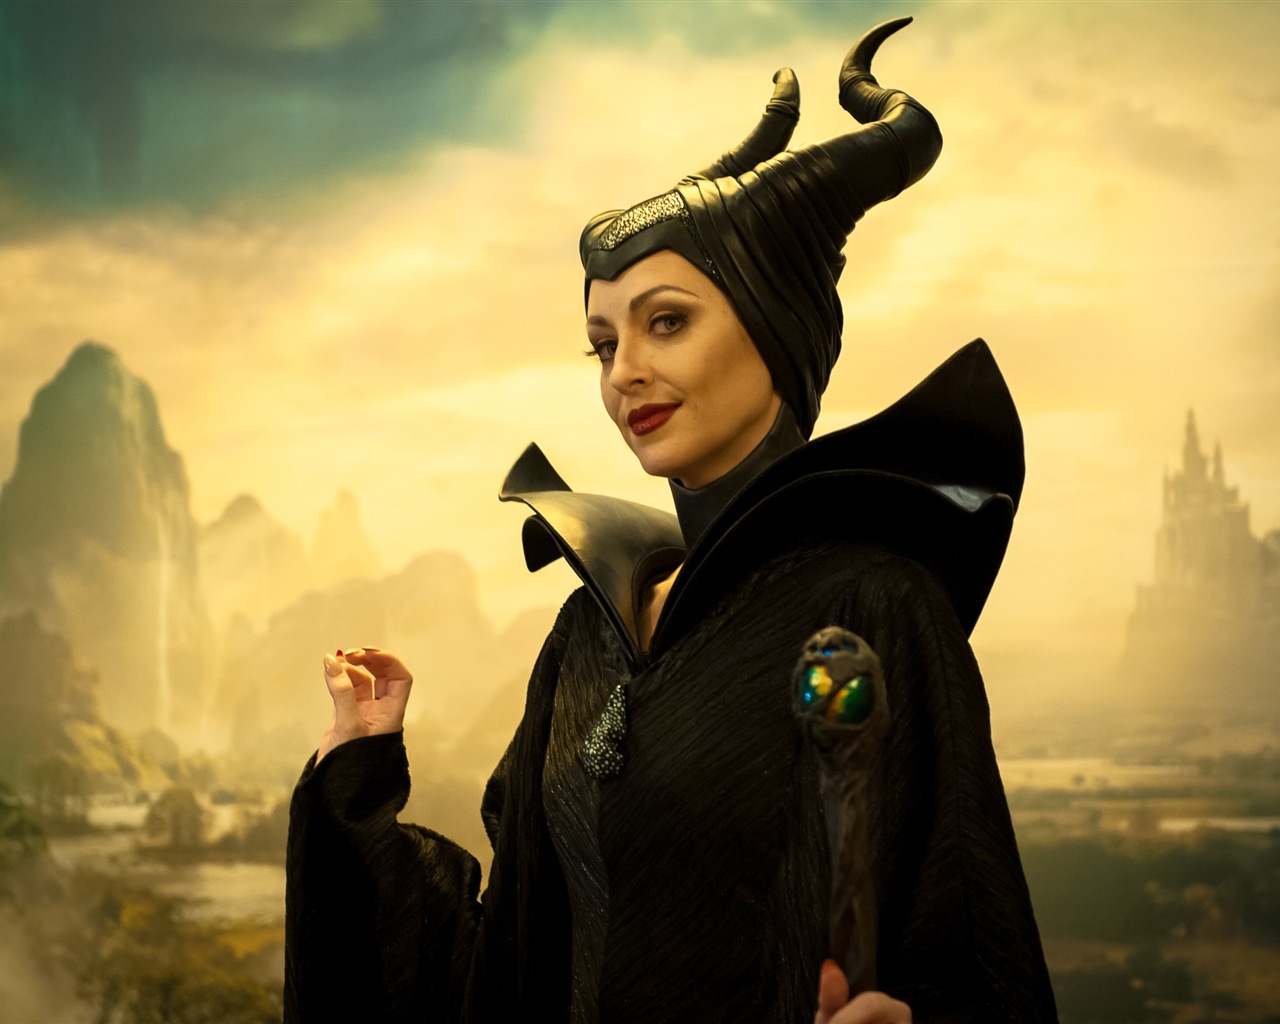 Maleficent 2014 HD movie wallpapers #11 - 1280x1024